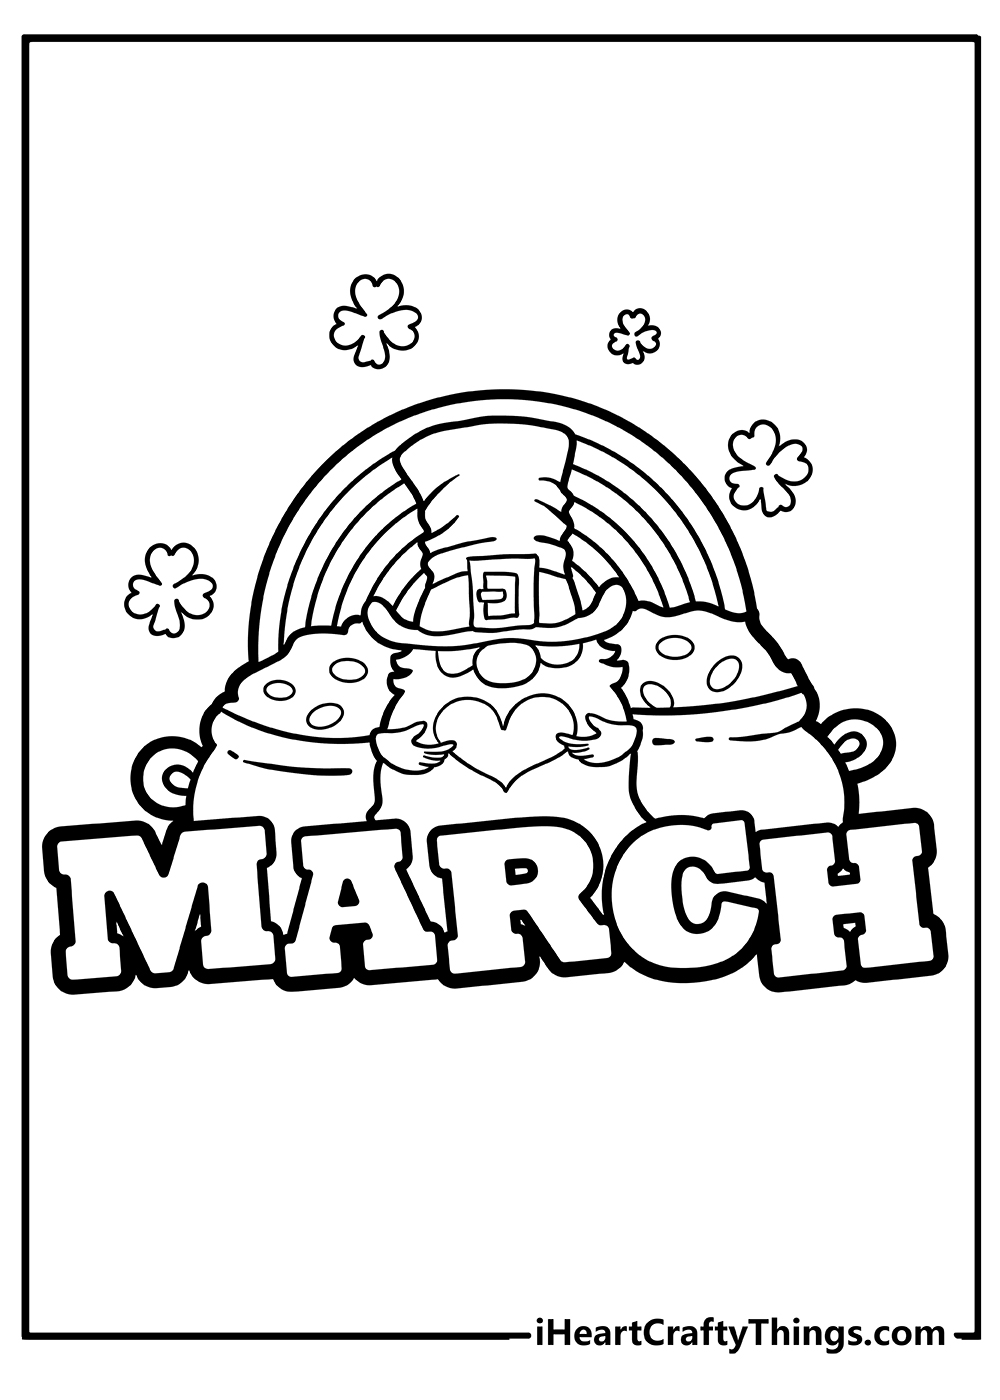 March Coloring Book free printable